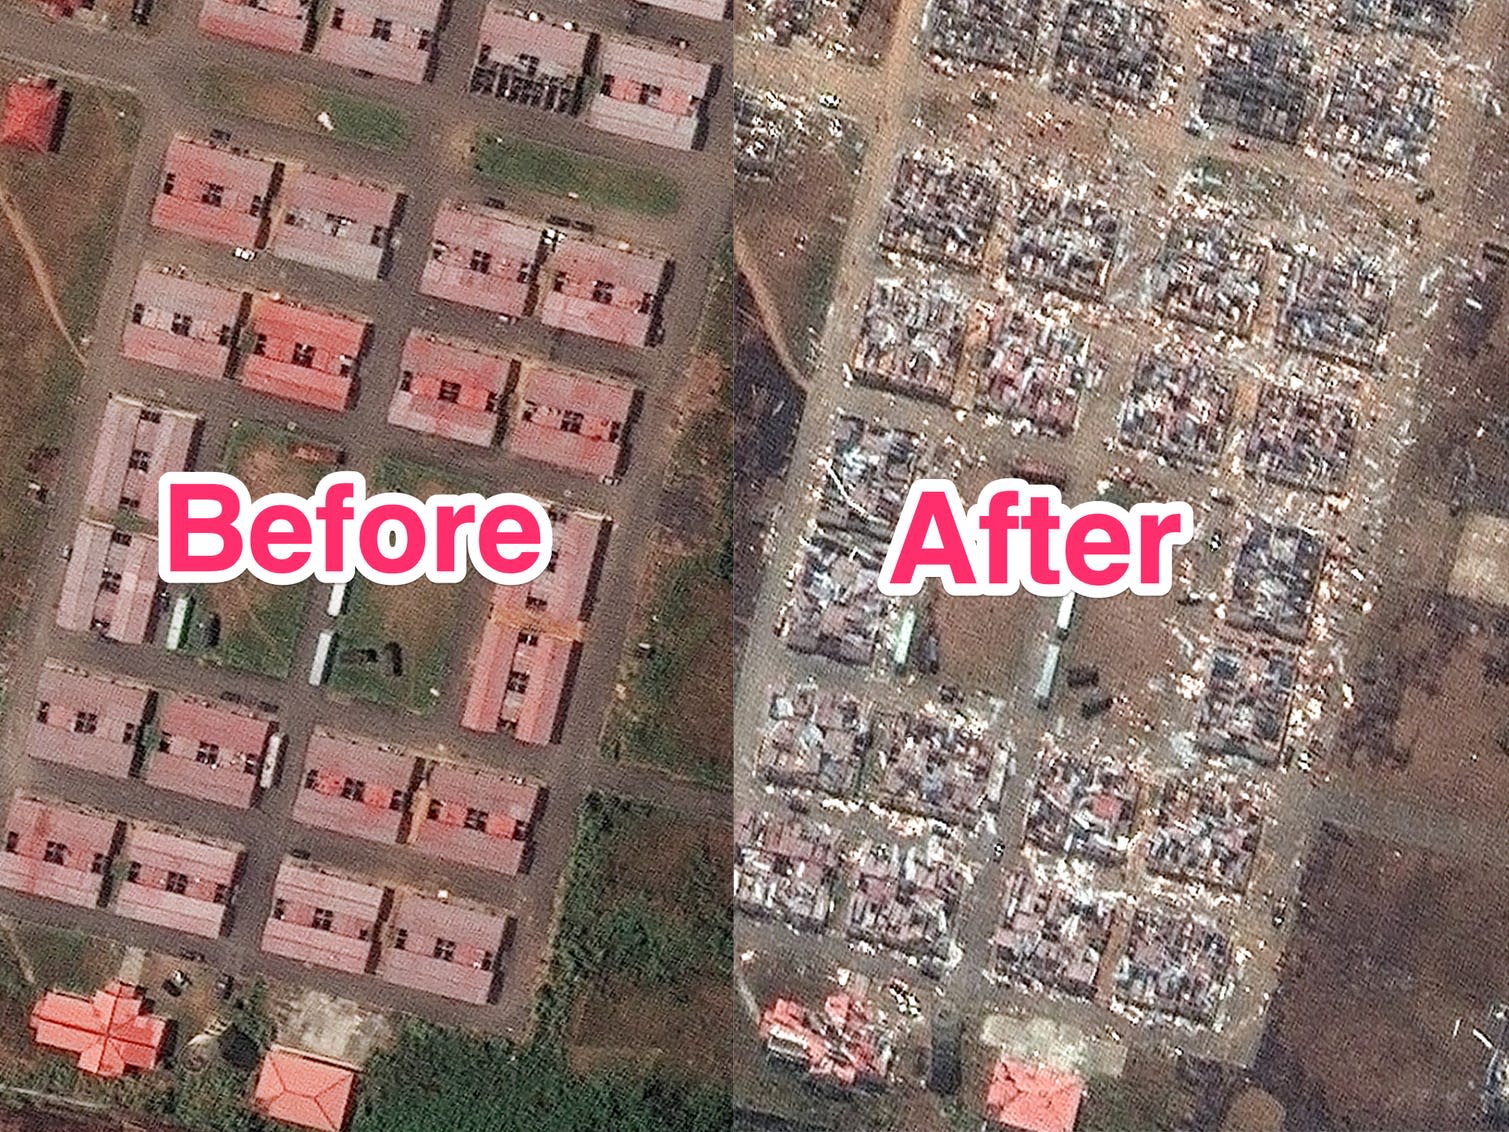 These aerial photos before and after show the devastation left behind by the explosion of the huge military complex in Equatorial Guinea